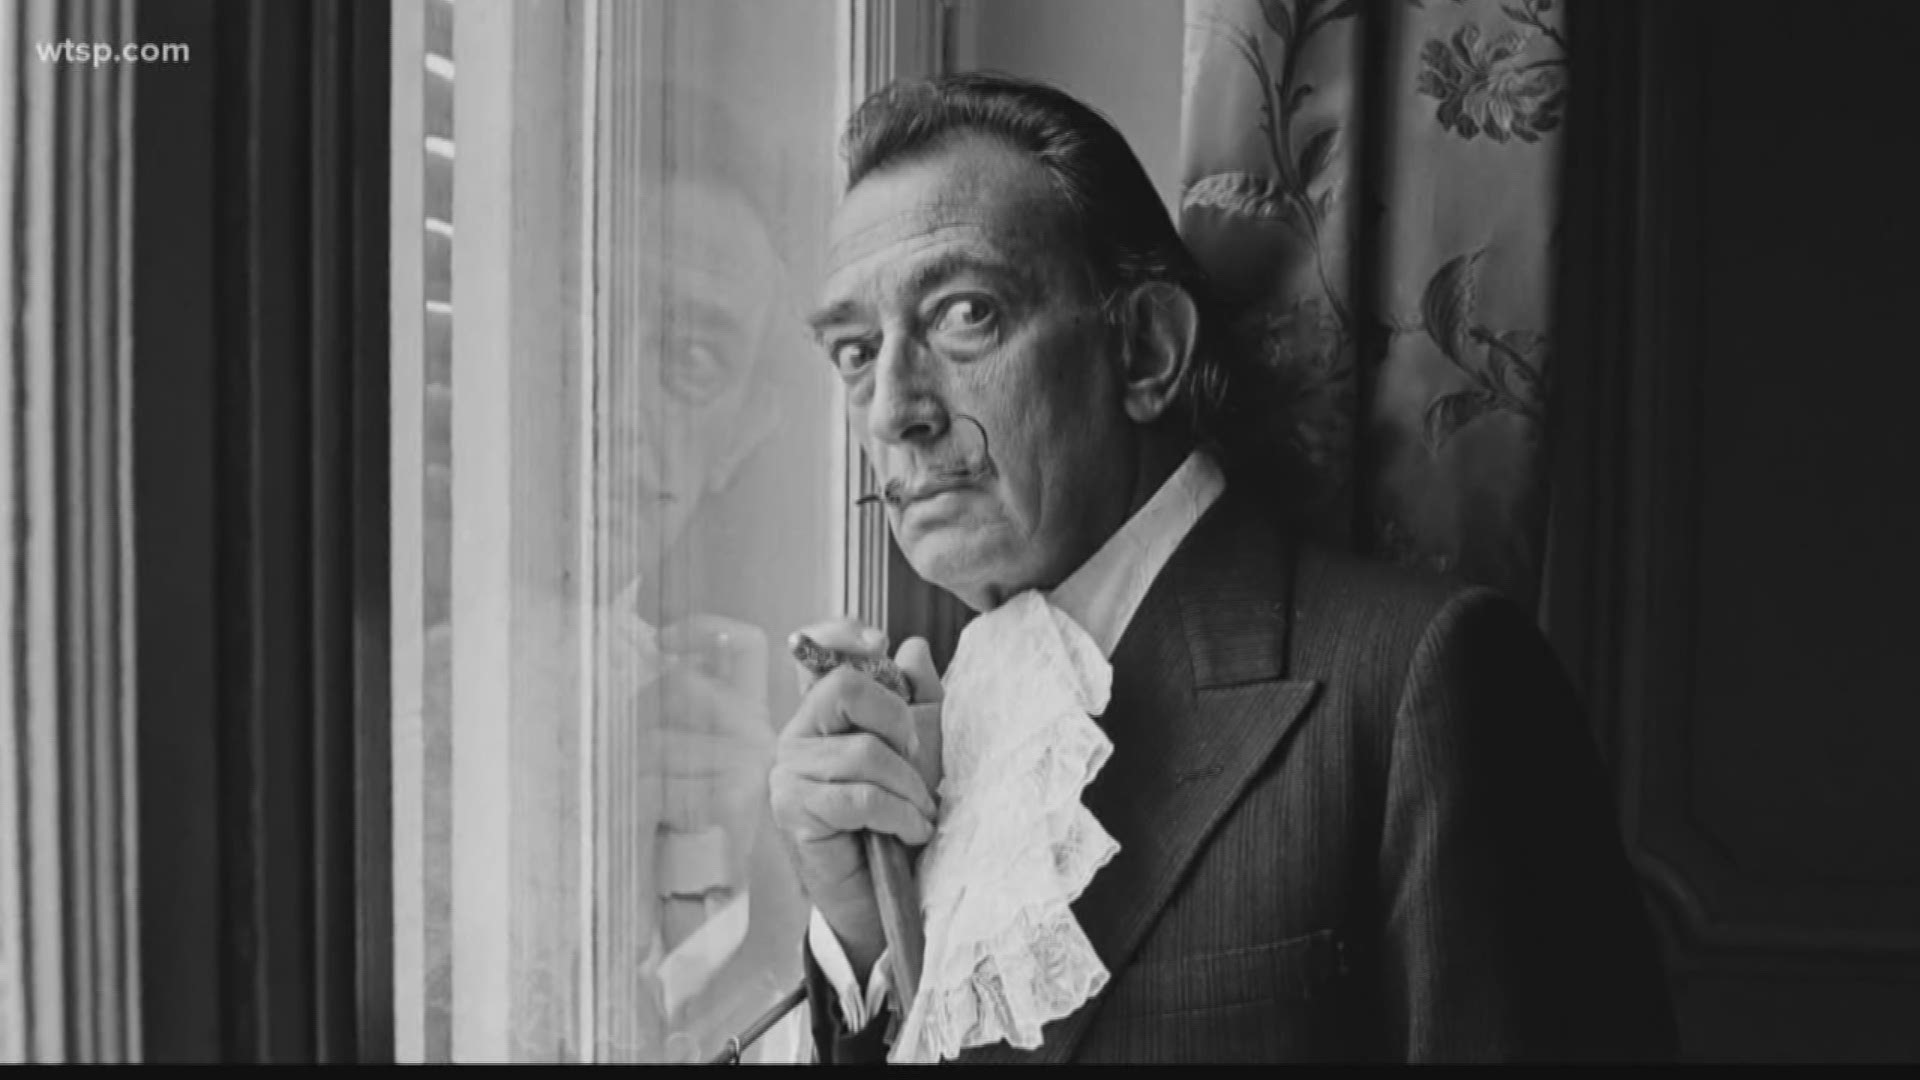 Salvador Dali died 31 years ago today, Jan. 23, 1989.